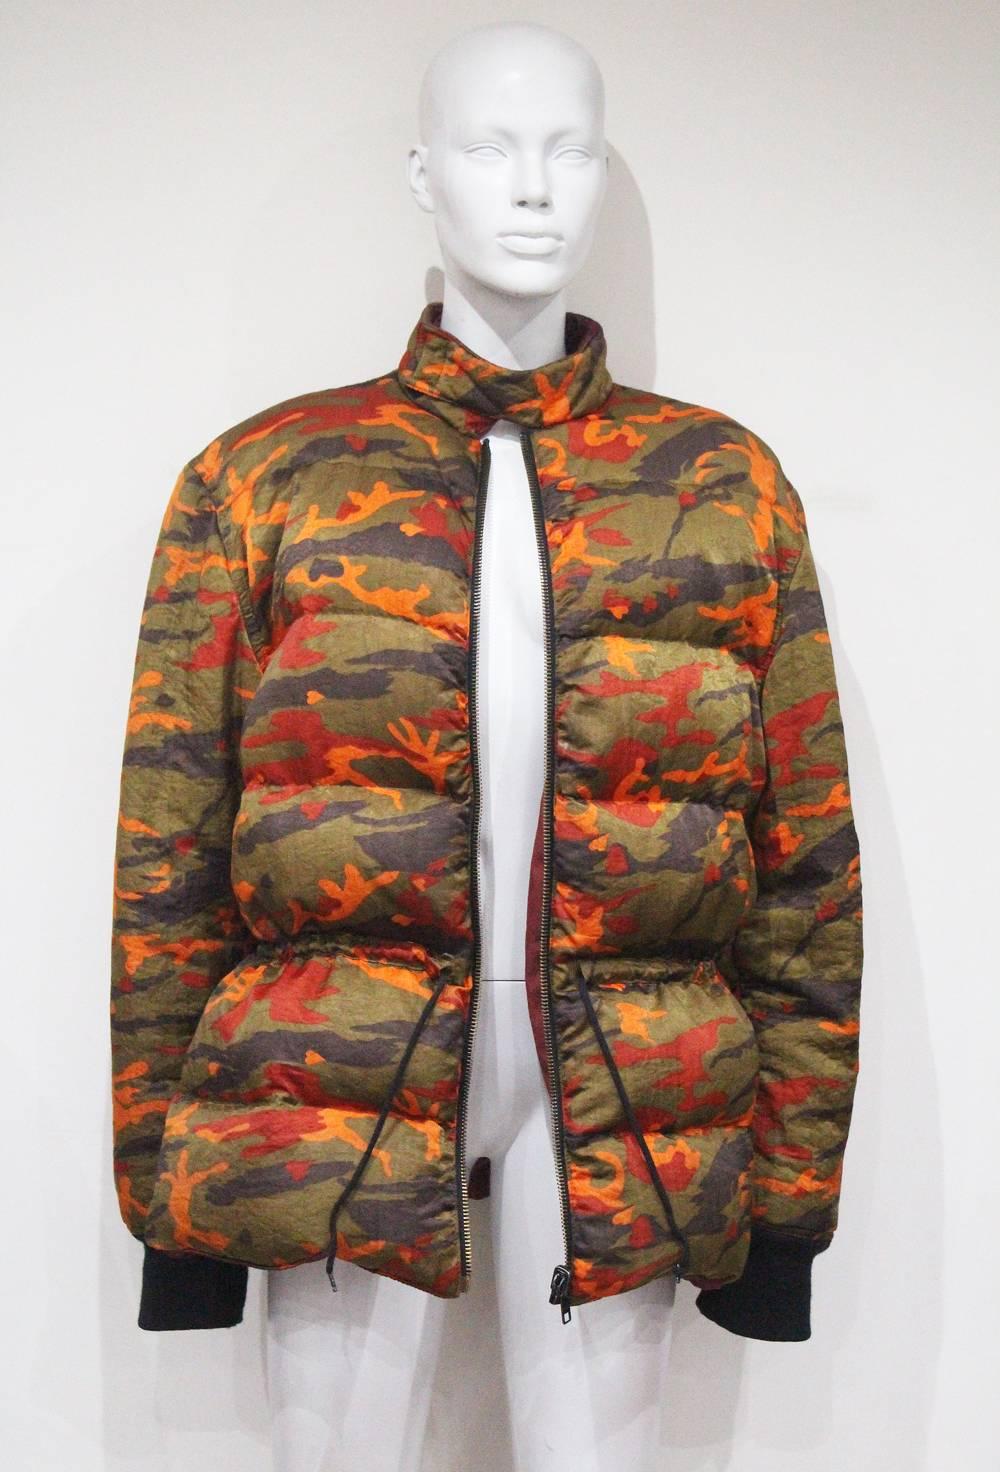 An oversized Junior Gaultier puffa jacket designed by Jean Paul Gaultier in the early 1990s. The puffa jacket with orange camo print features large padded quilts, knitted cuffs, zip closure, drawstring waist, and maroon double lining.

Large